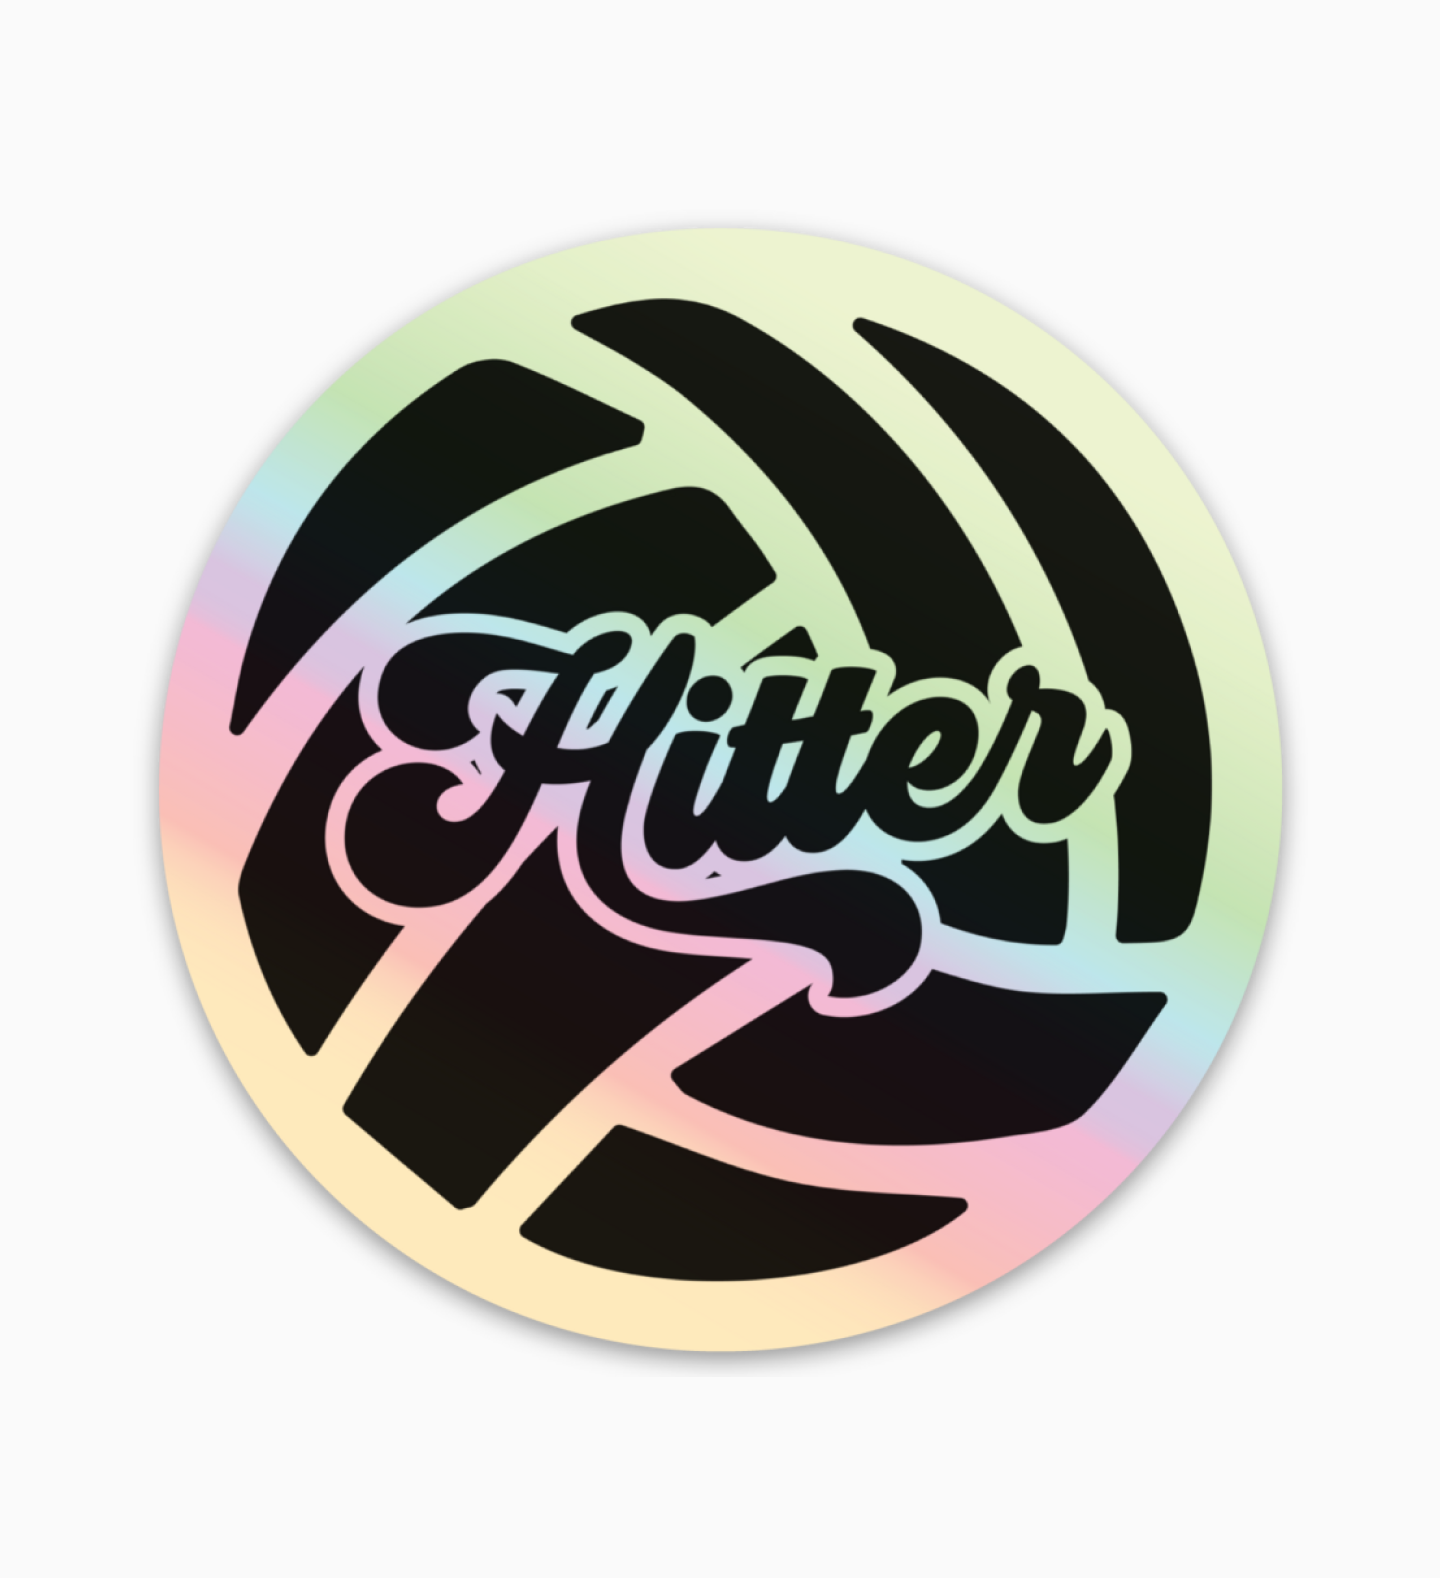 Hitter - Volleyball Position Holographic Iridescent Sticker